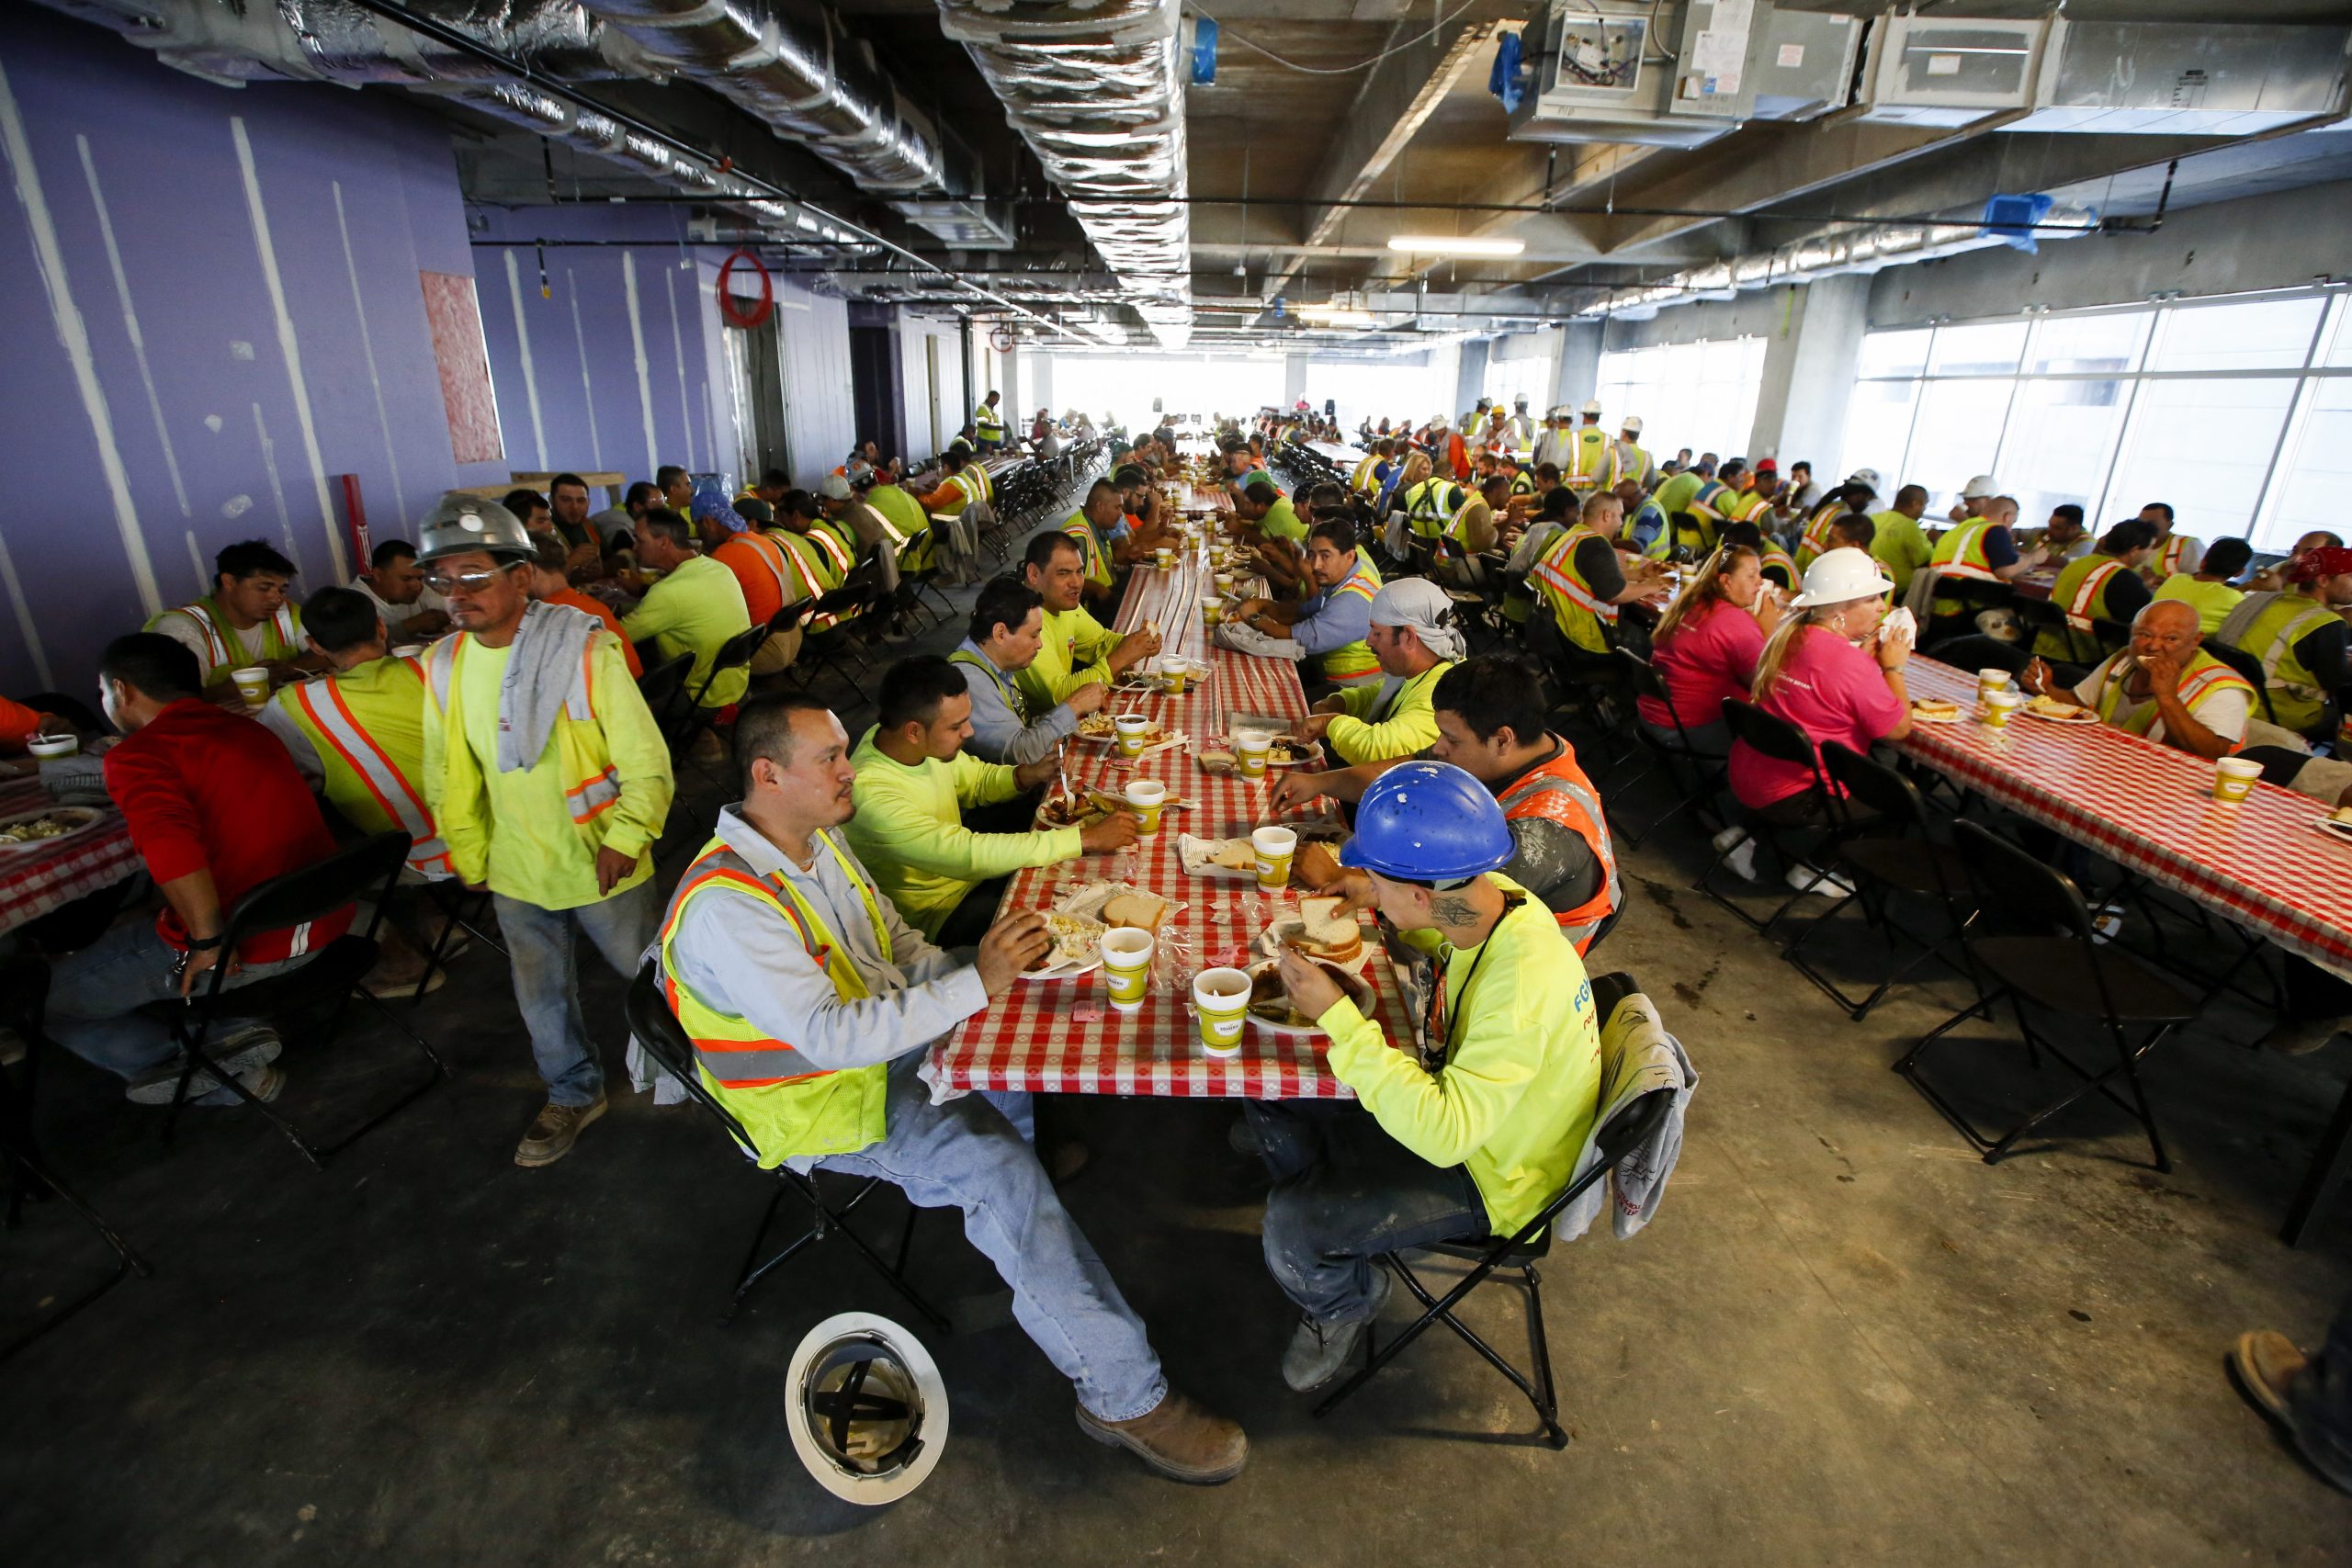 MetroNational topping out party, Friday Oct. 17, 2014 in Houston.